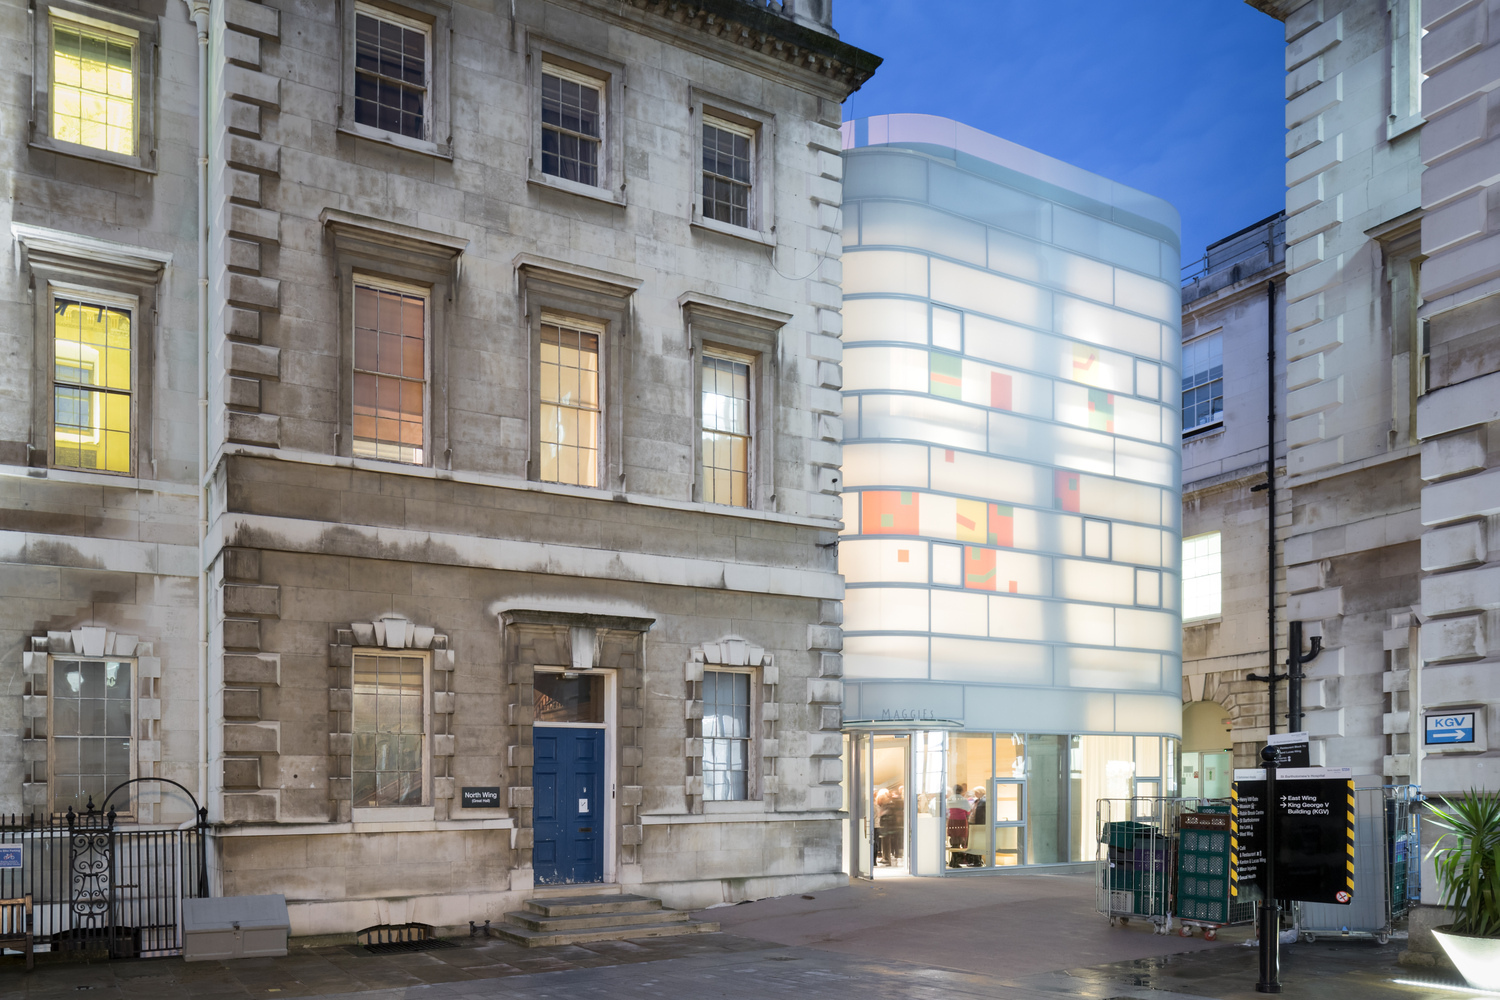 The translucent Maggie Centre Barts in London.